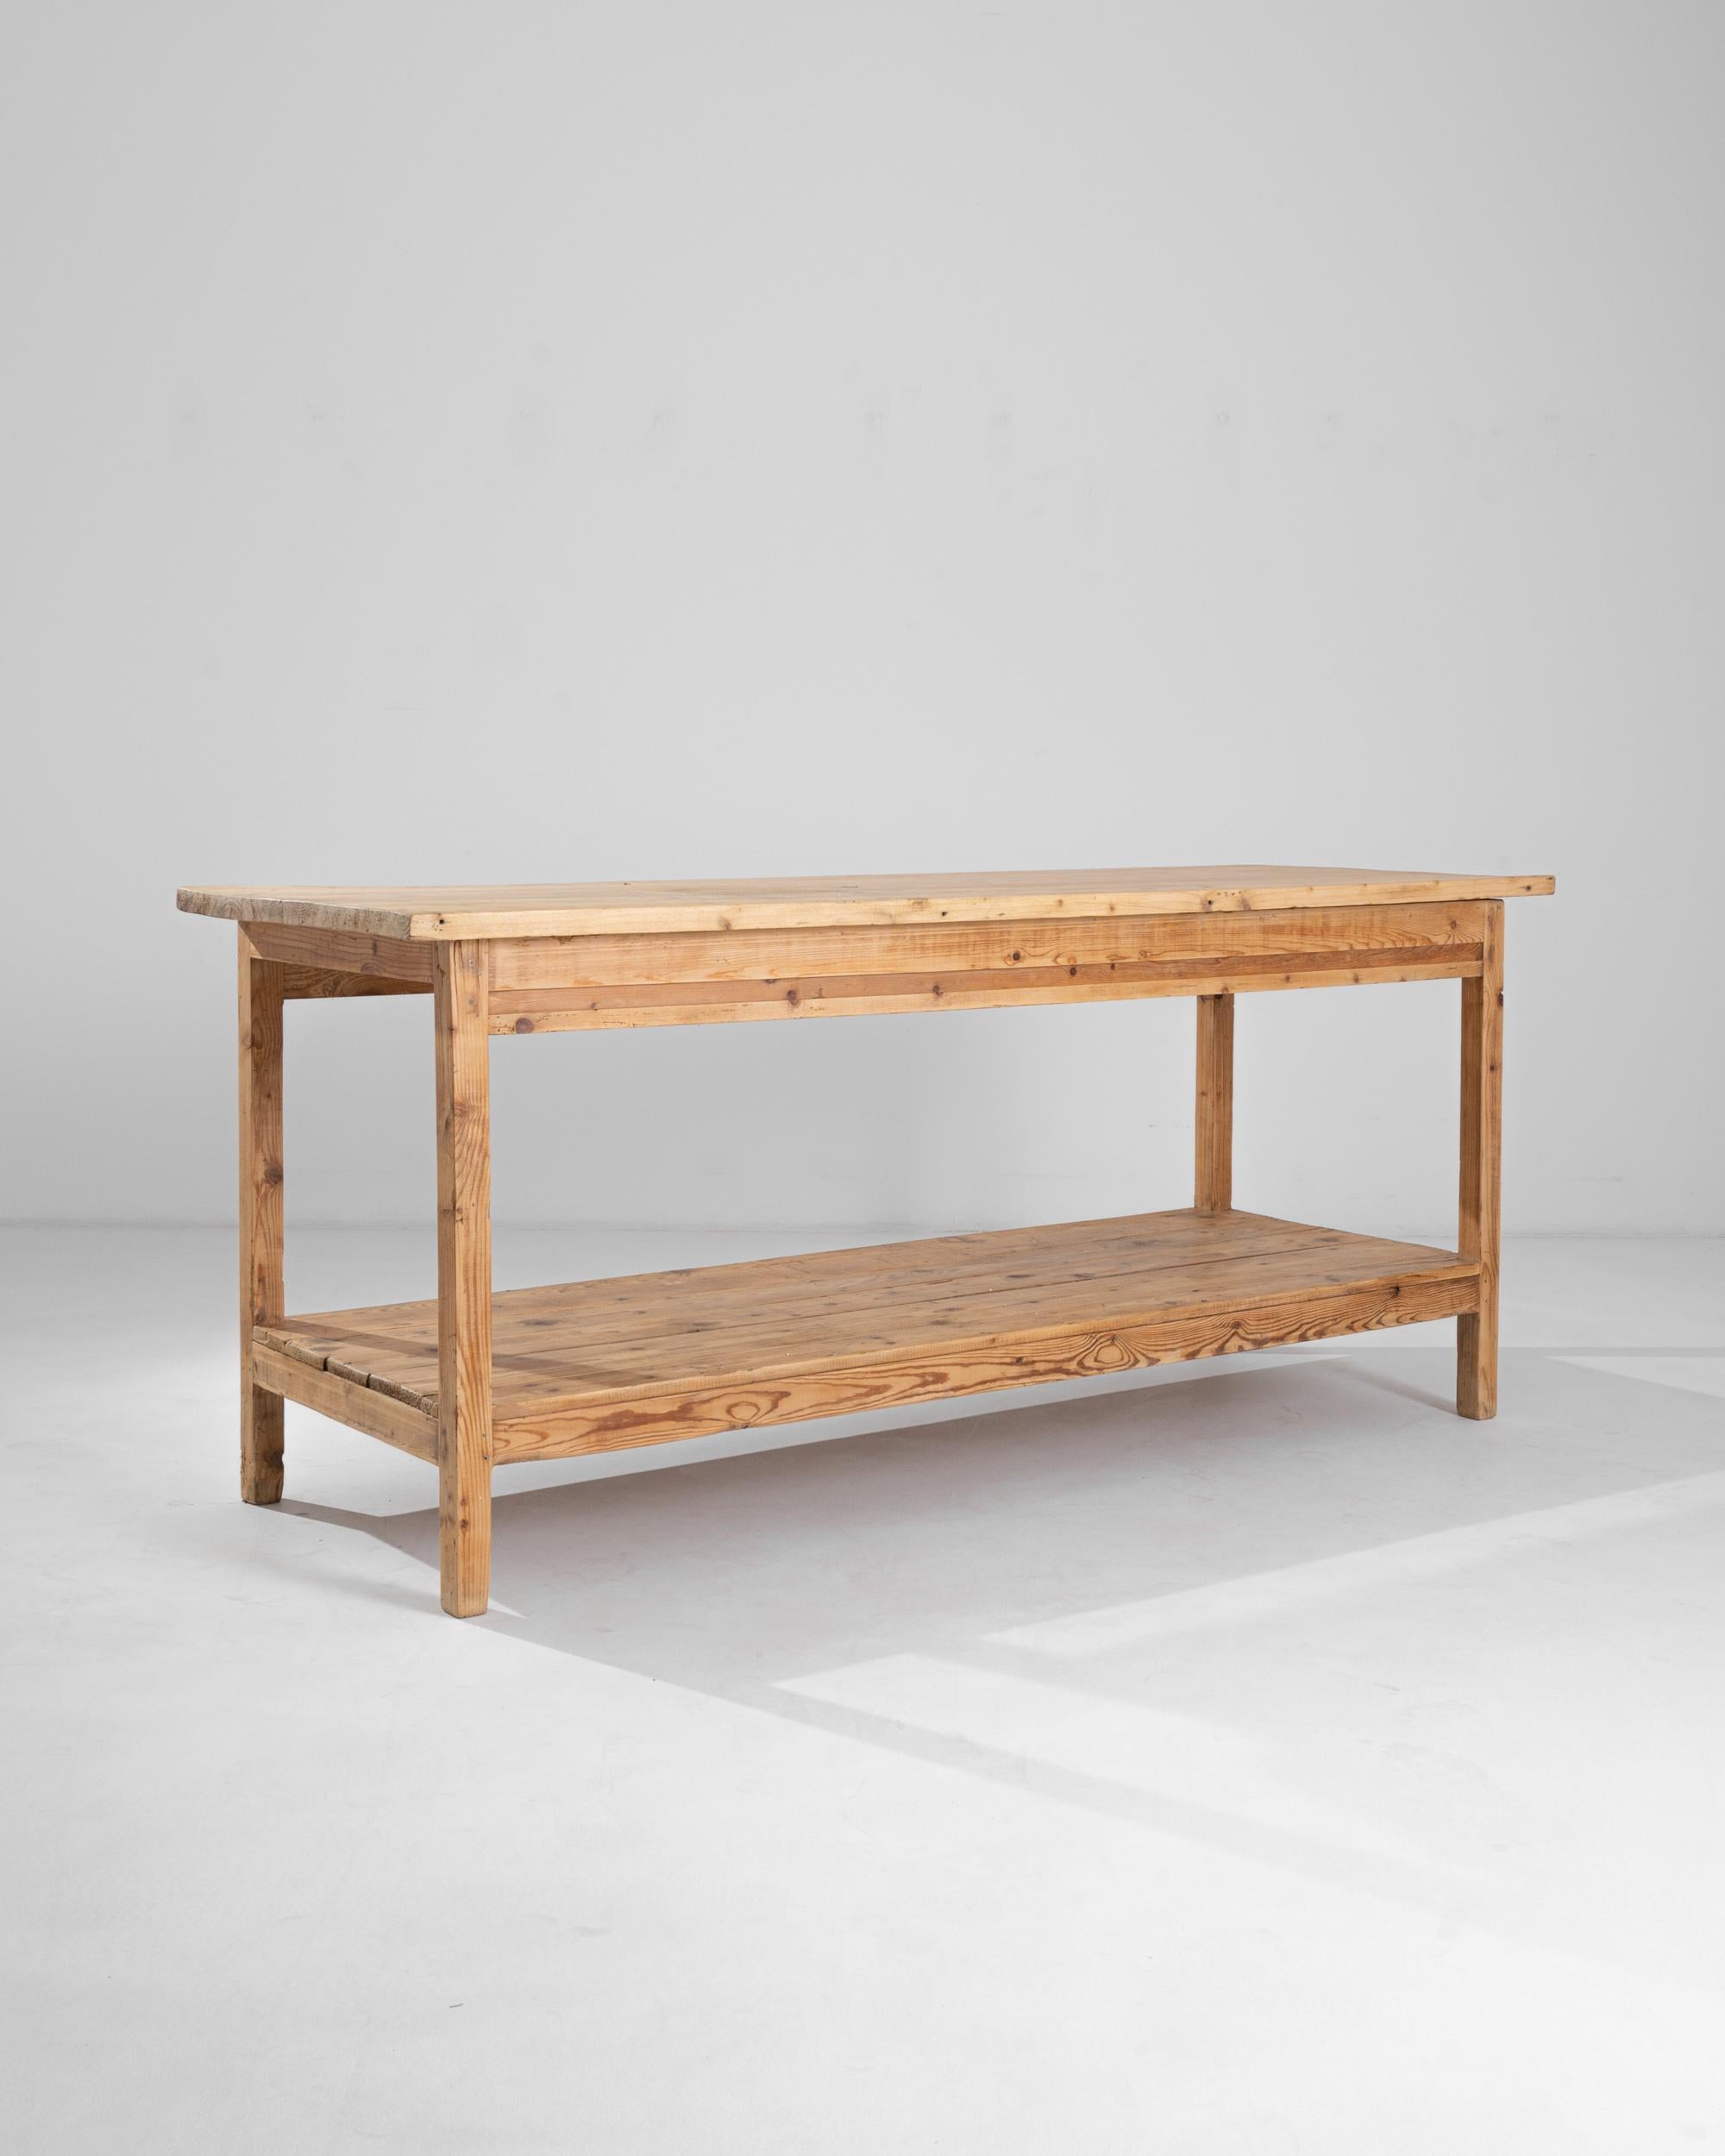 A Central European wooden table from the 20th century. This table is composed of long, bright planks of wood that form an expansive top and lower shelf. Subtle but complex wood grain shines quietly across its structure, emitting a hardworking and